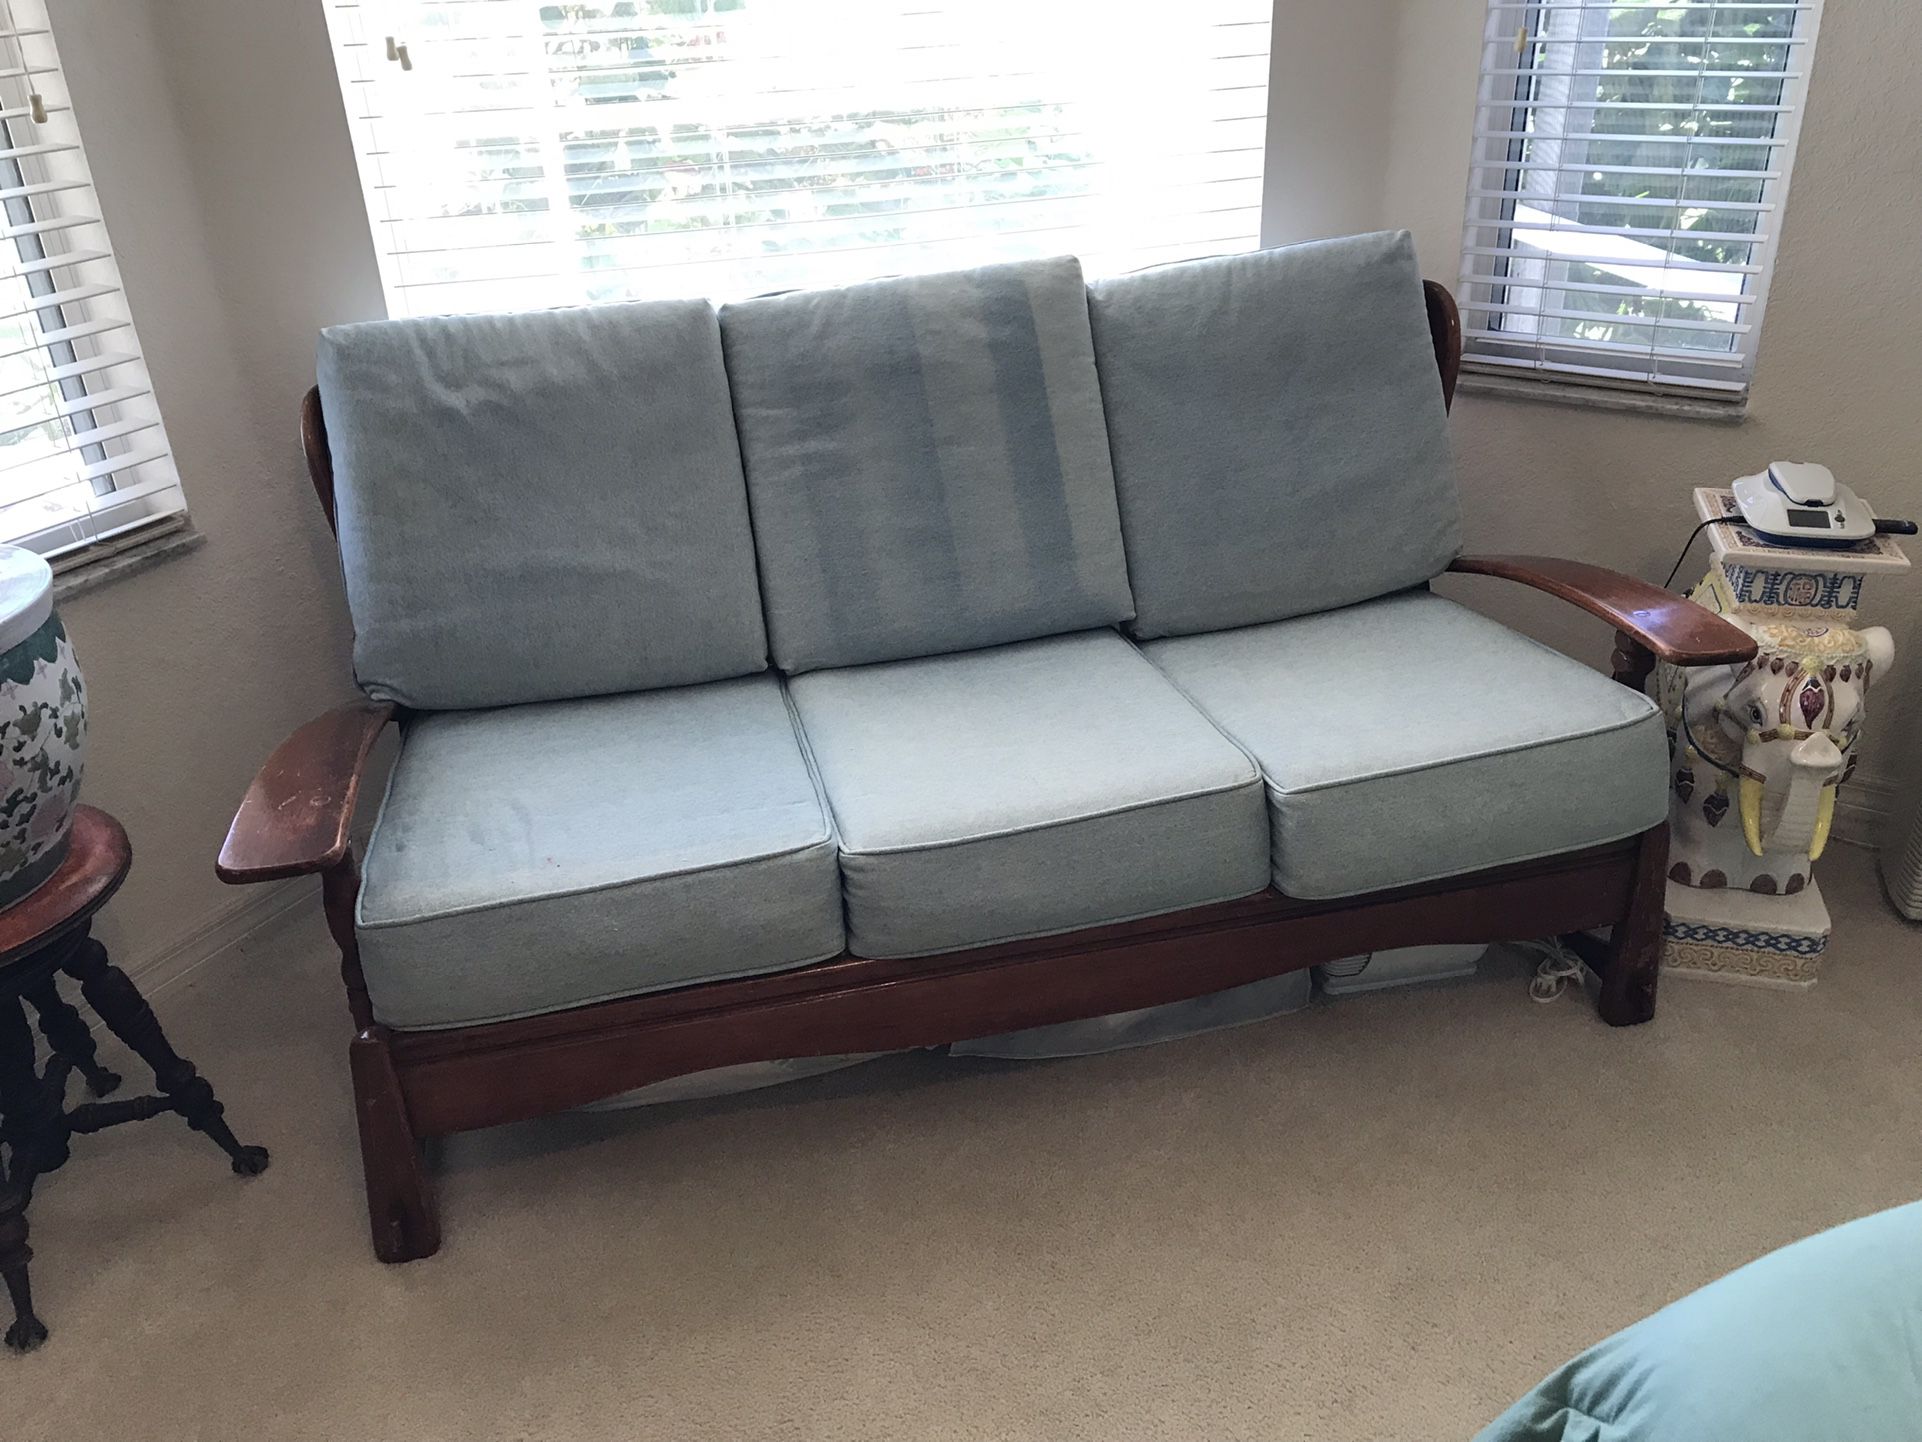 MID-20TH CENTURY QUARTER-SAWN SOLID MAPLE SOFA & CHAIR FOR HOUSE OR ENCLOSED LANAI